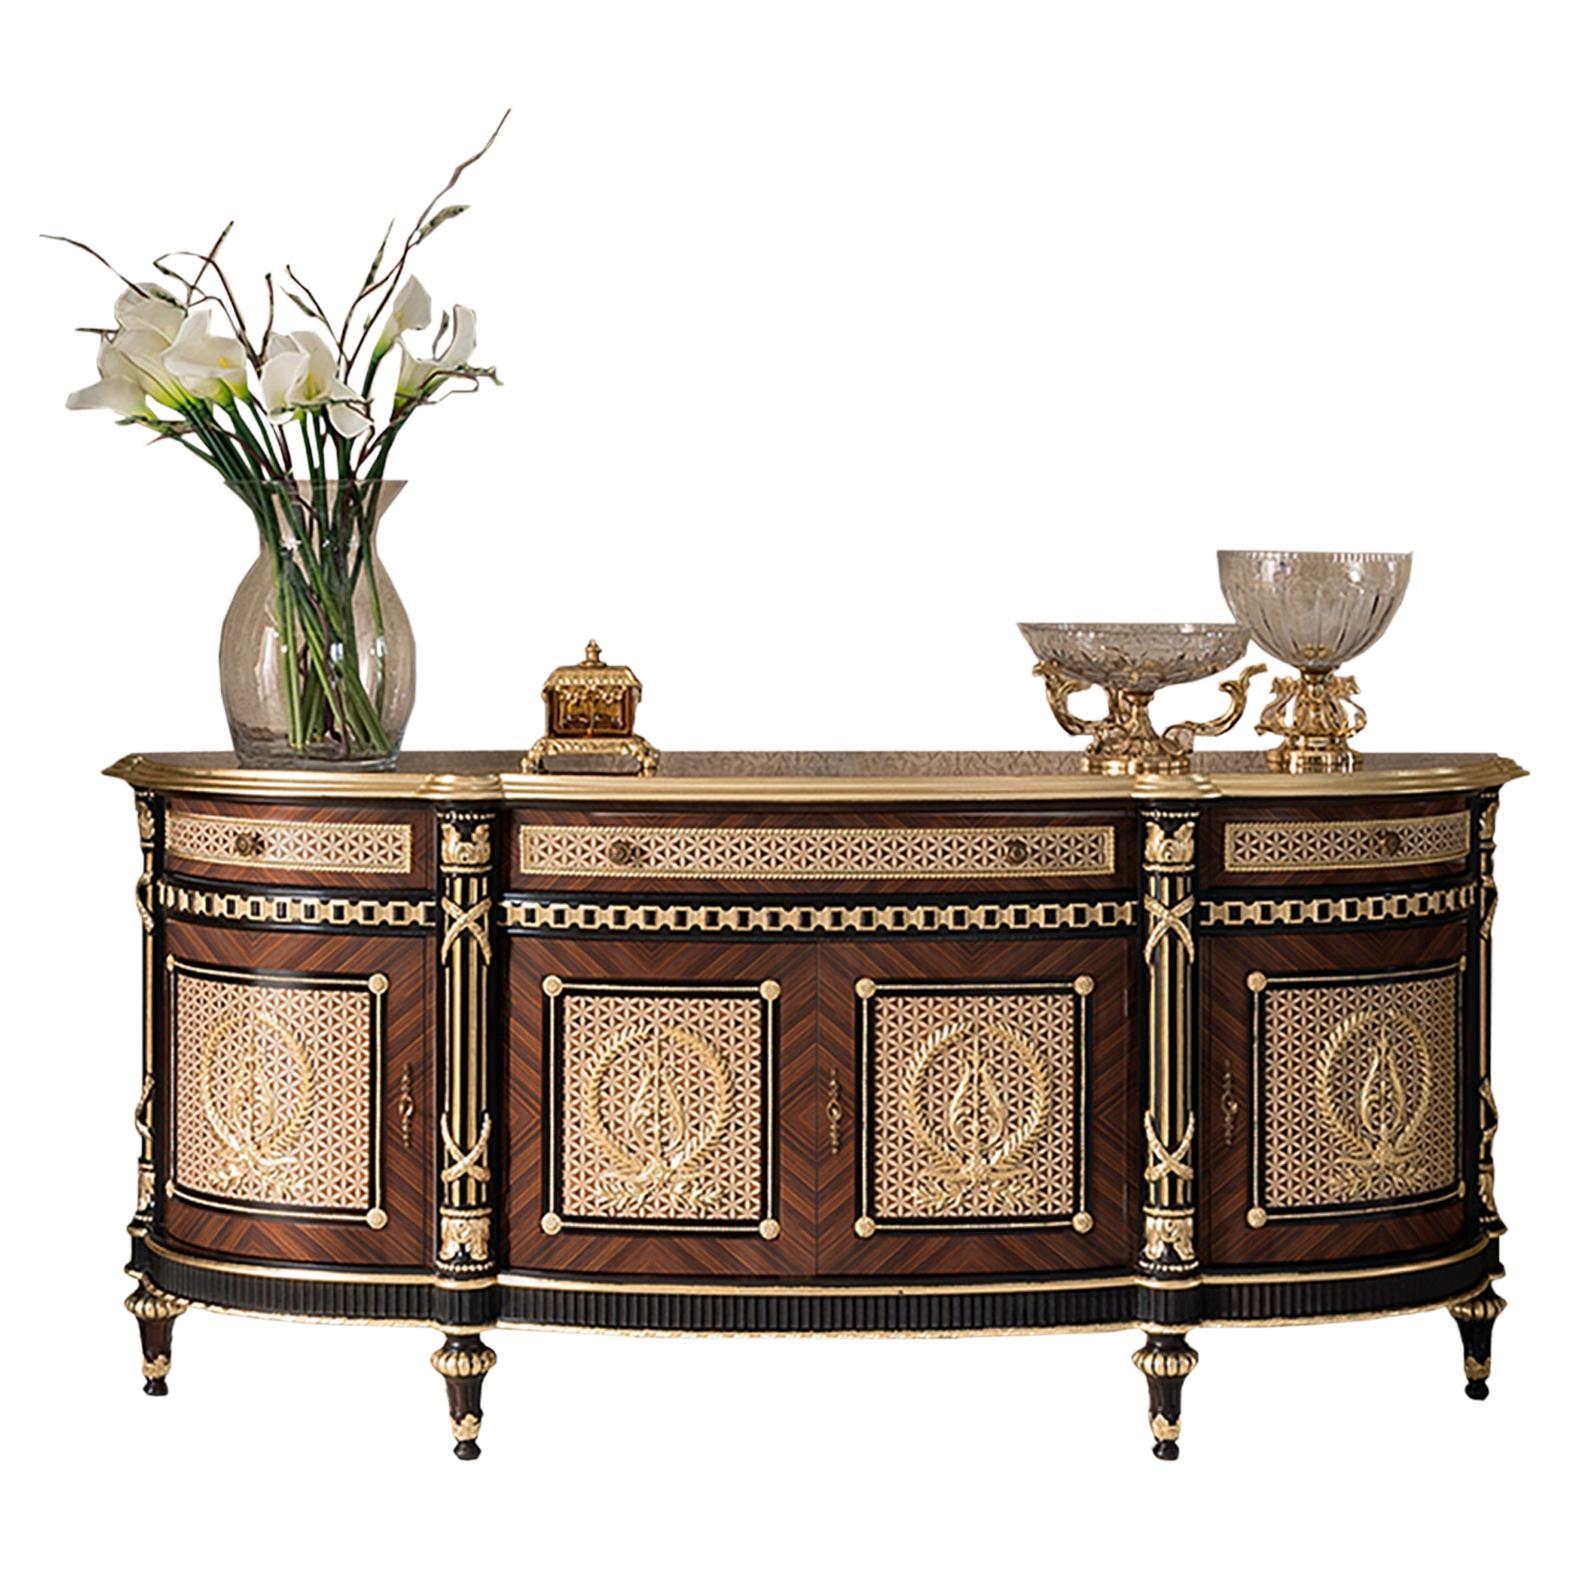 Deluxe Four Door Sideboard with Drawers and Radica Inlays by Modenese